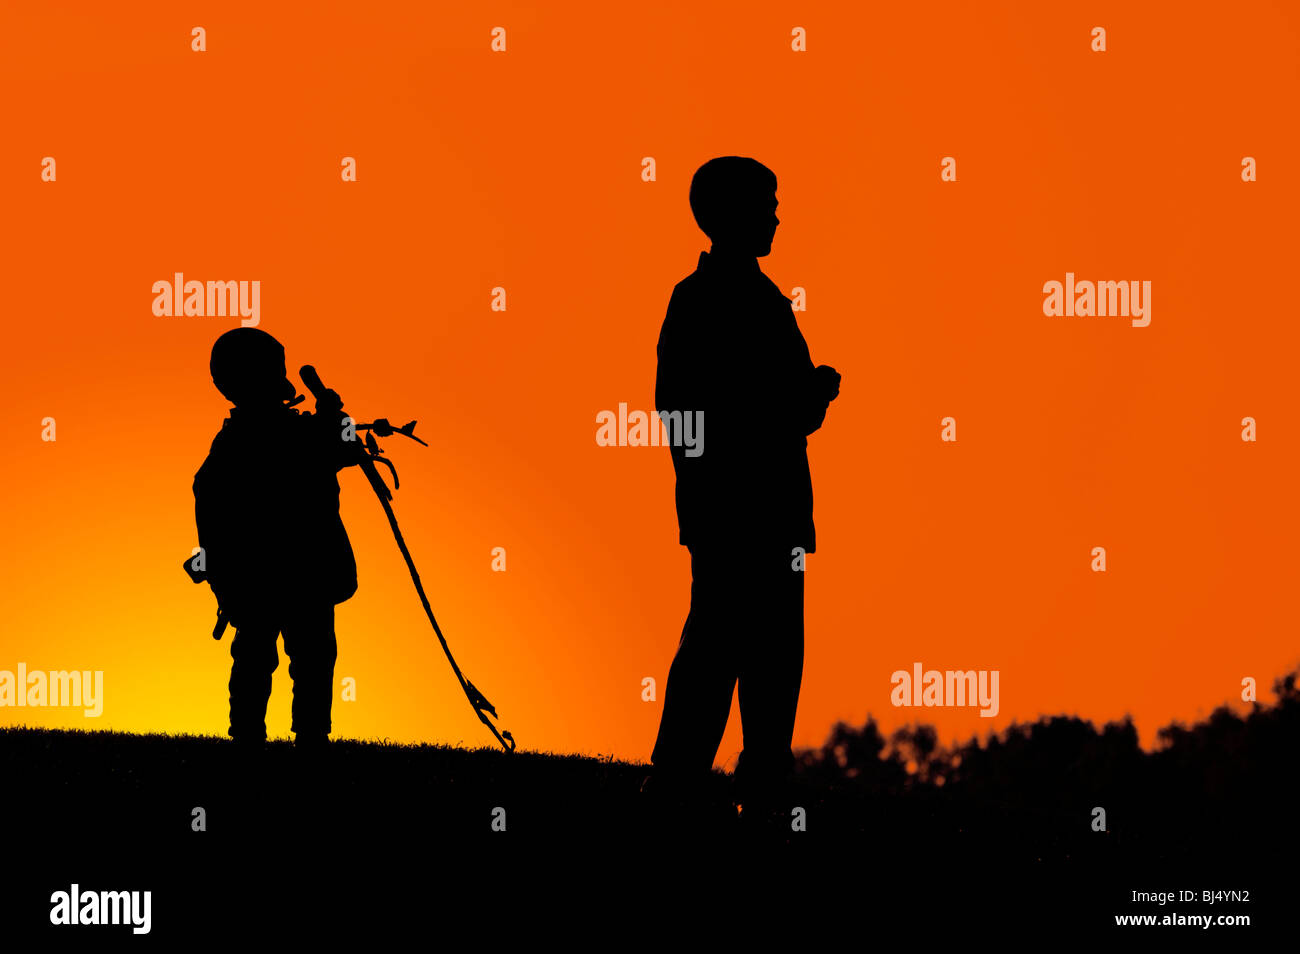 Two boys standing on a hill dark silhouette over colorful digitally adjusted orange evening sky Stock Photo